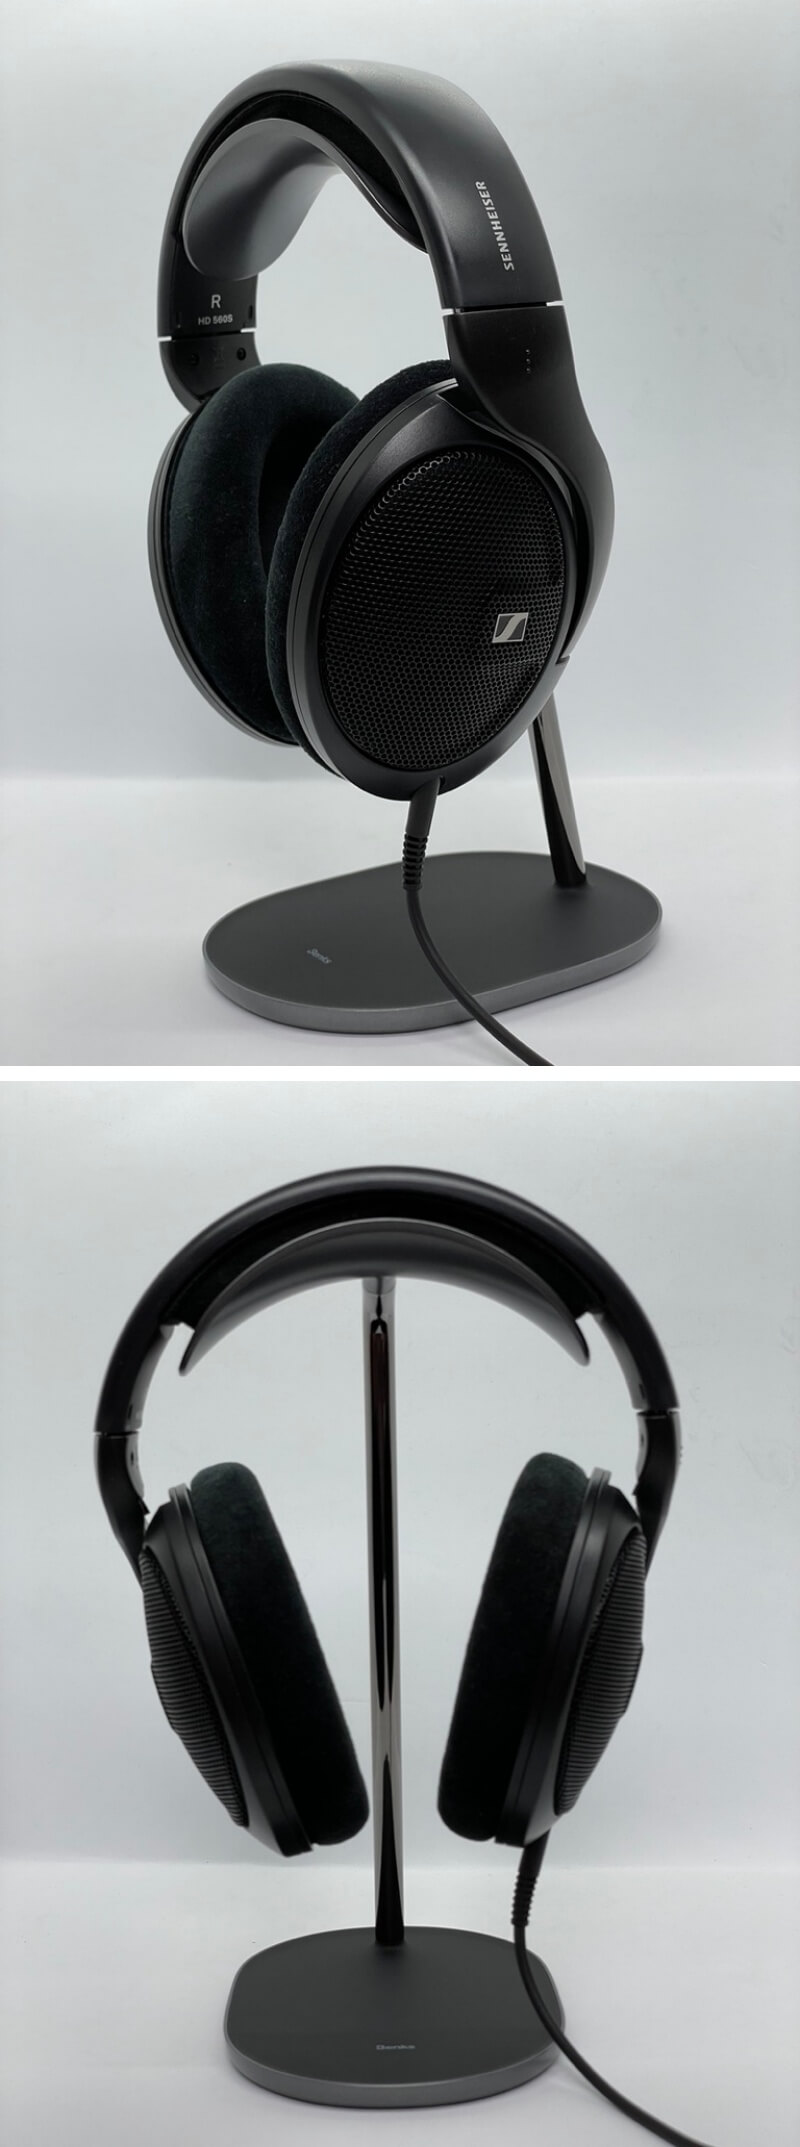 benks headphone stand with HD560s